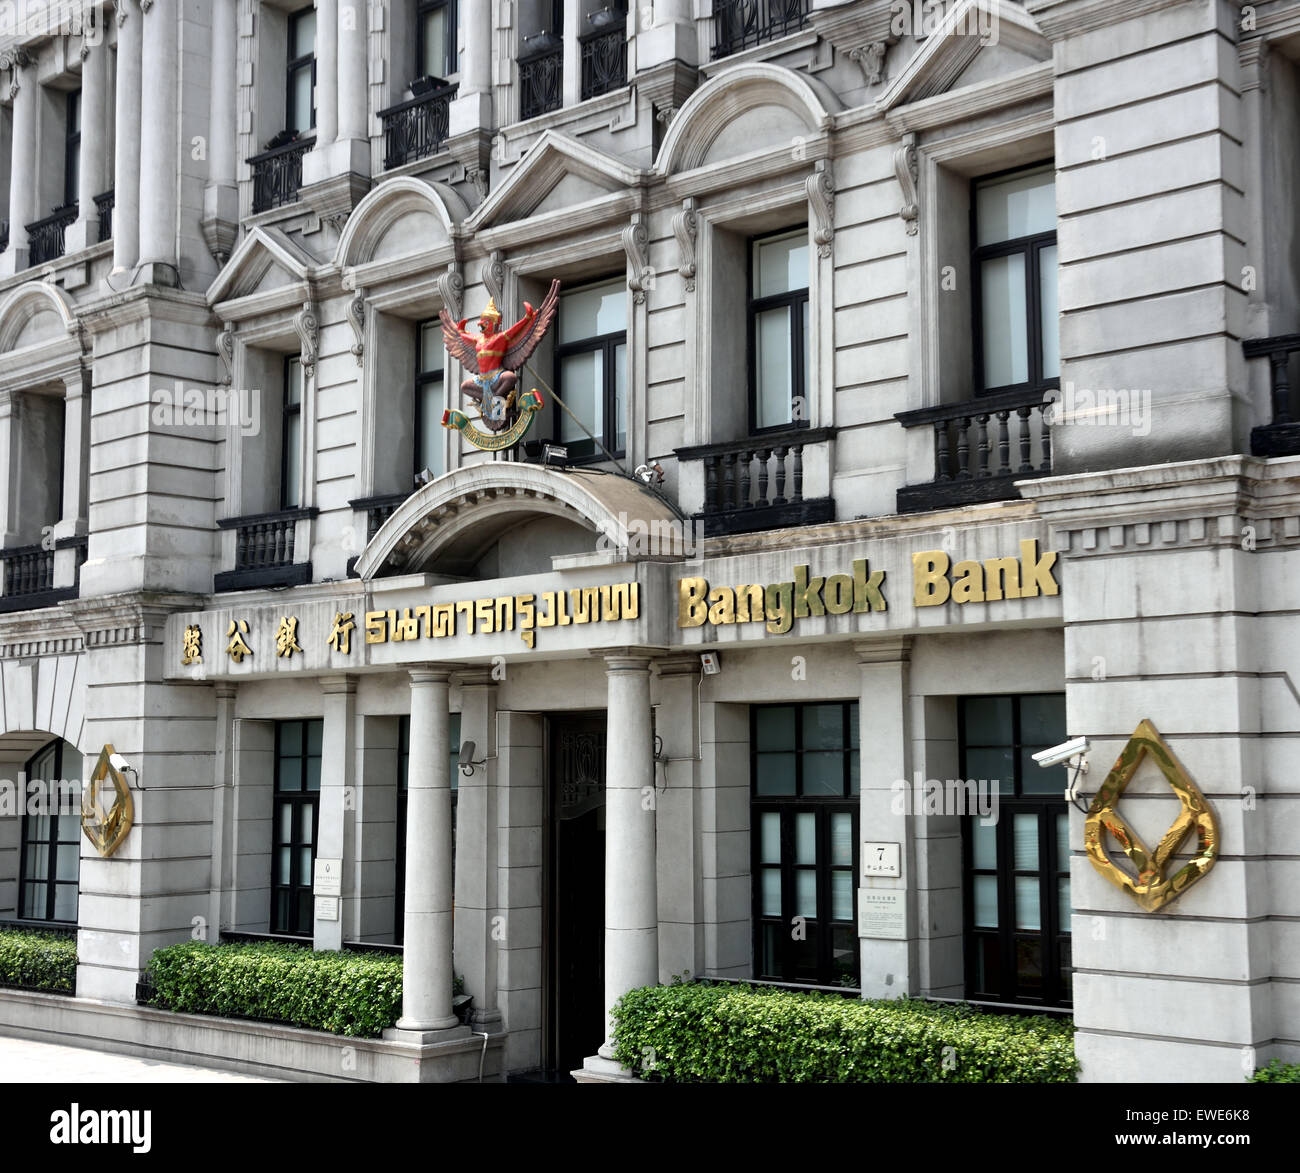 Bangkok Bank Old Historic and modern Buildings on The Bund Shanghai China  ( European style architecture ) Stock Photo